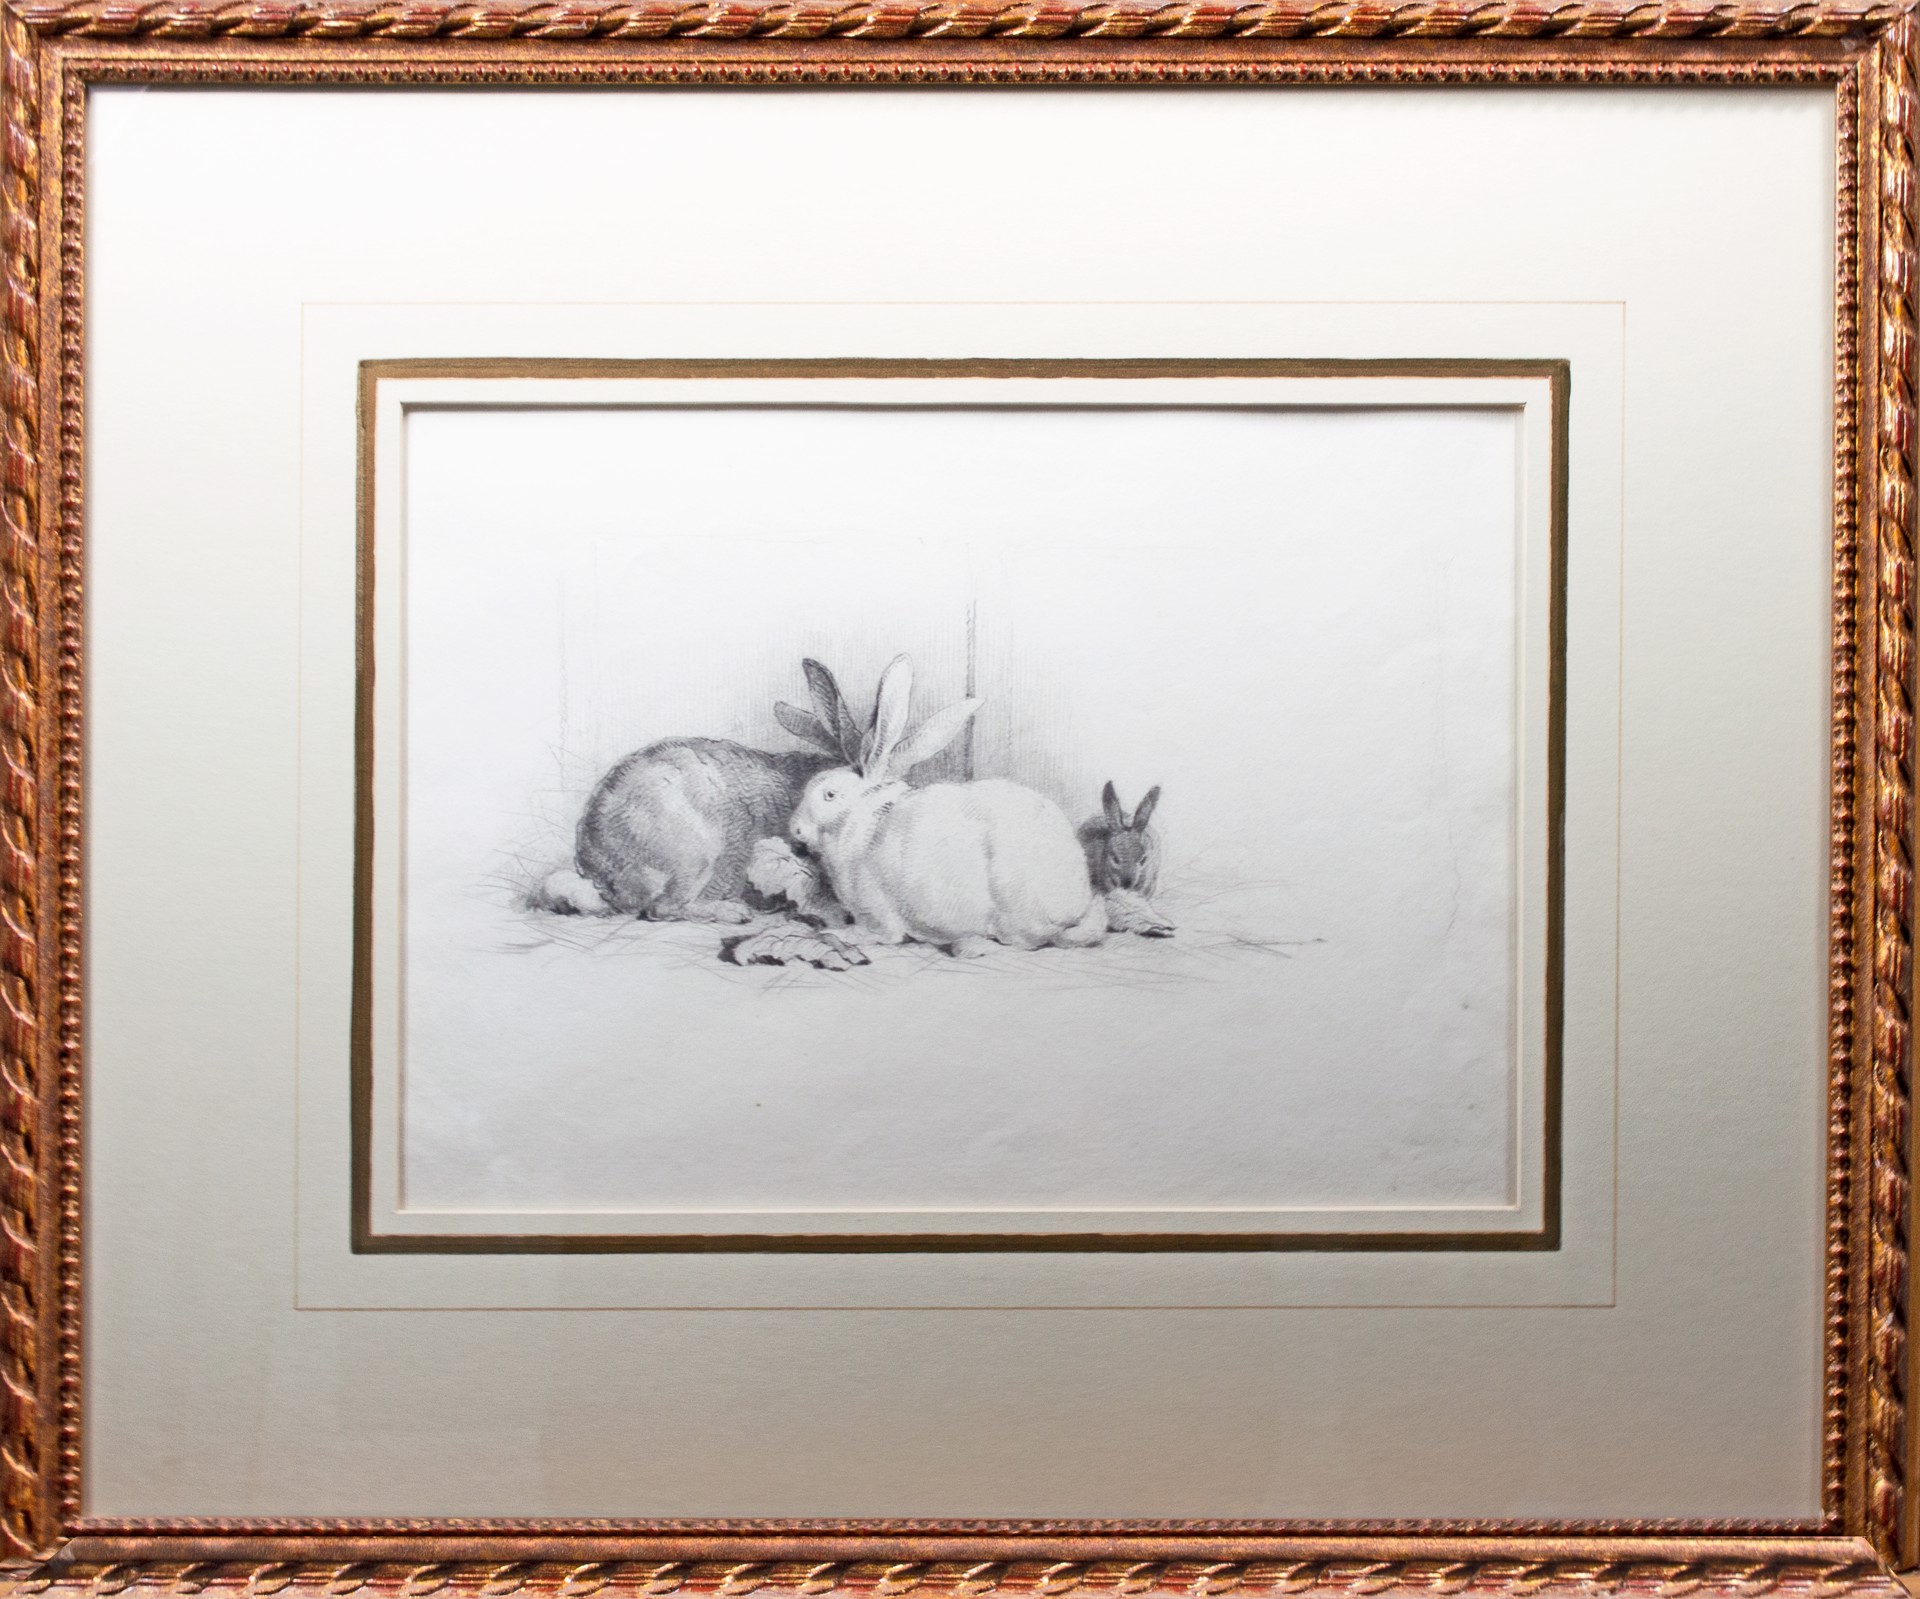 Three Rabbits, Rothschild Collection by William Hall